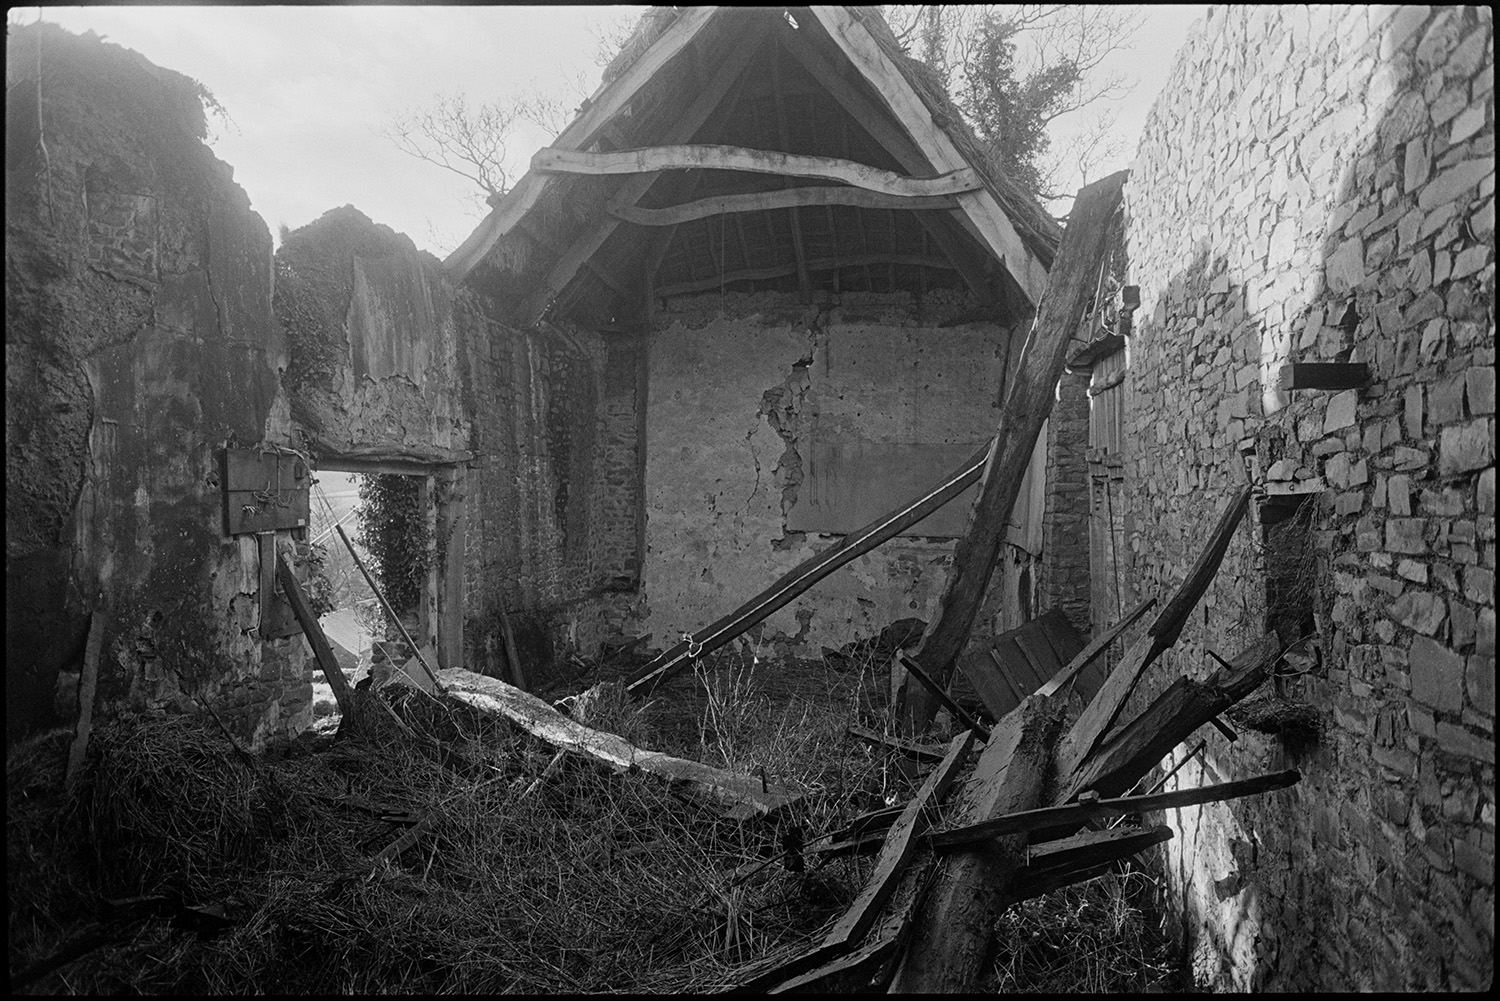 Collapsed cob and thatch barn, fallen oak beams. Now restored by new owners,
[Interior of a cob and thatch barn with a collapsed roof, exposing oak beams, and partially collapsed walls, at Colleton Manor, Chulmleigh. The barn was later rebuilt.]